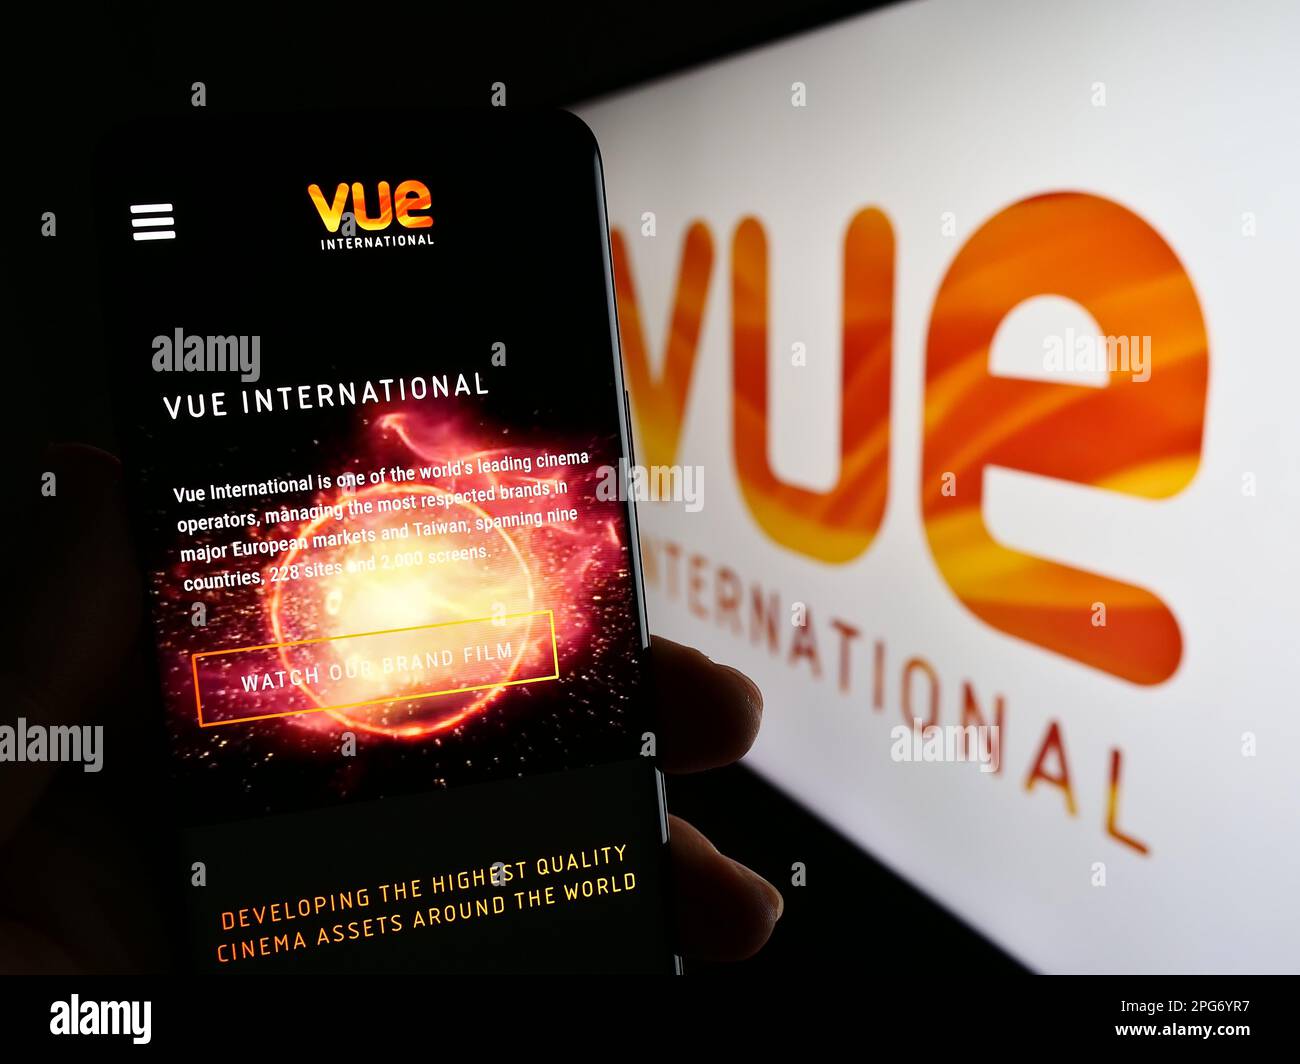 Person holding smartphone with website of entertainment company Vue International on screen in front of logo. Focus on center of phone display. Stock Photo